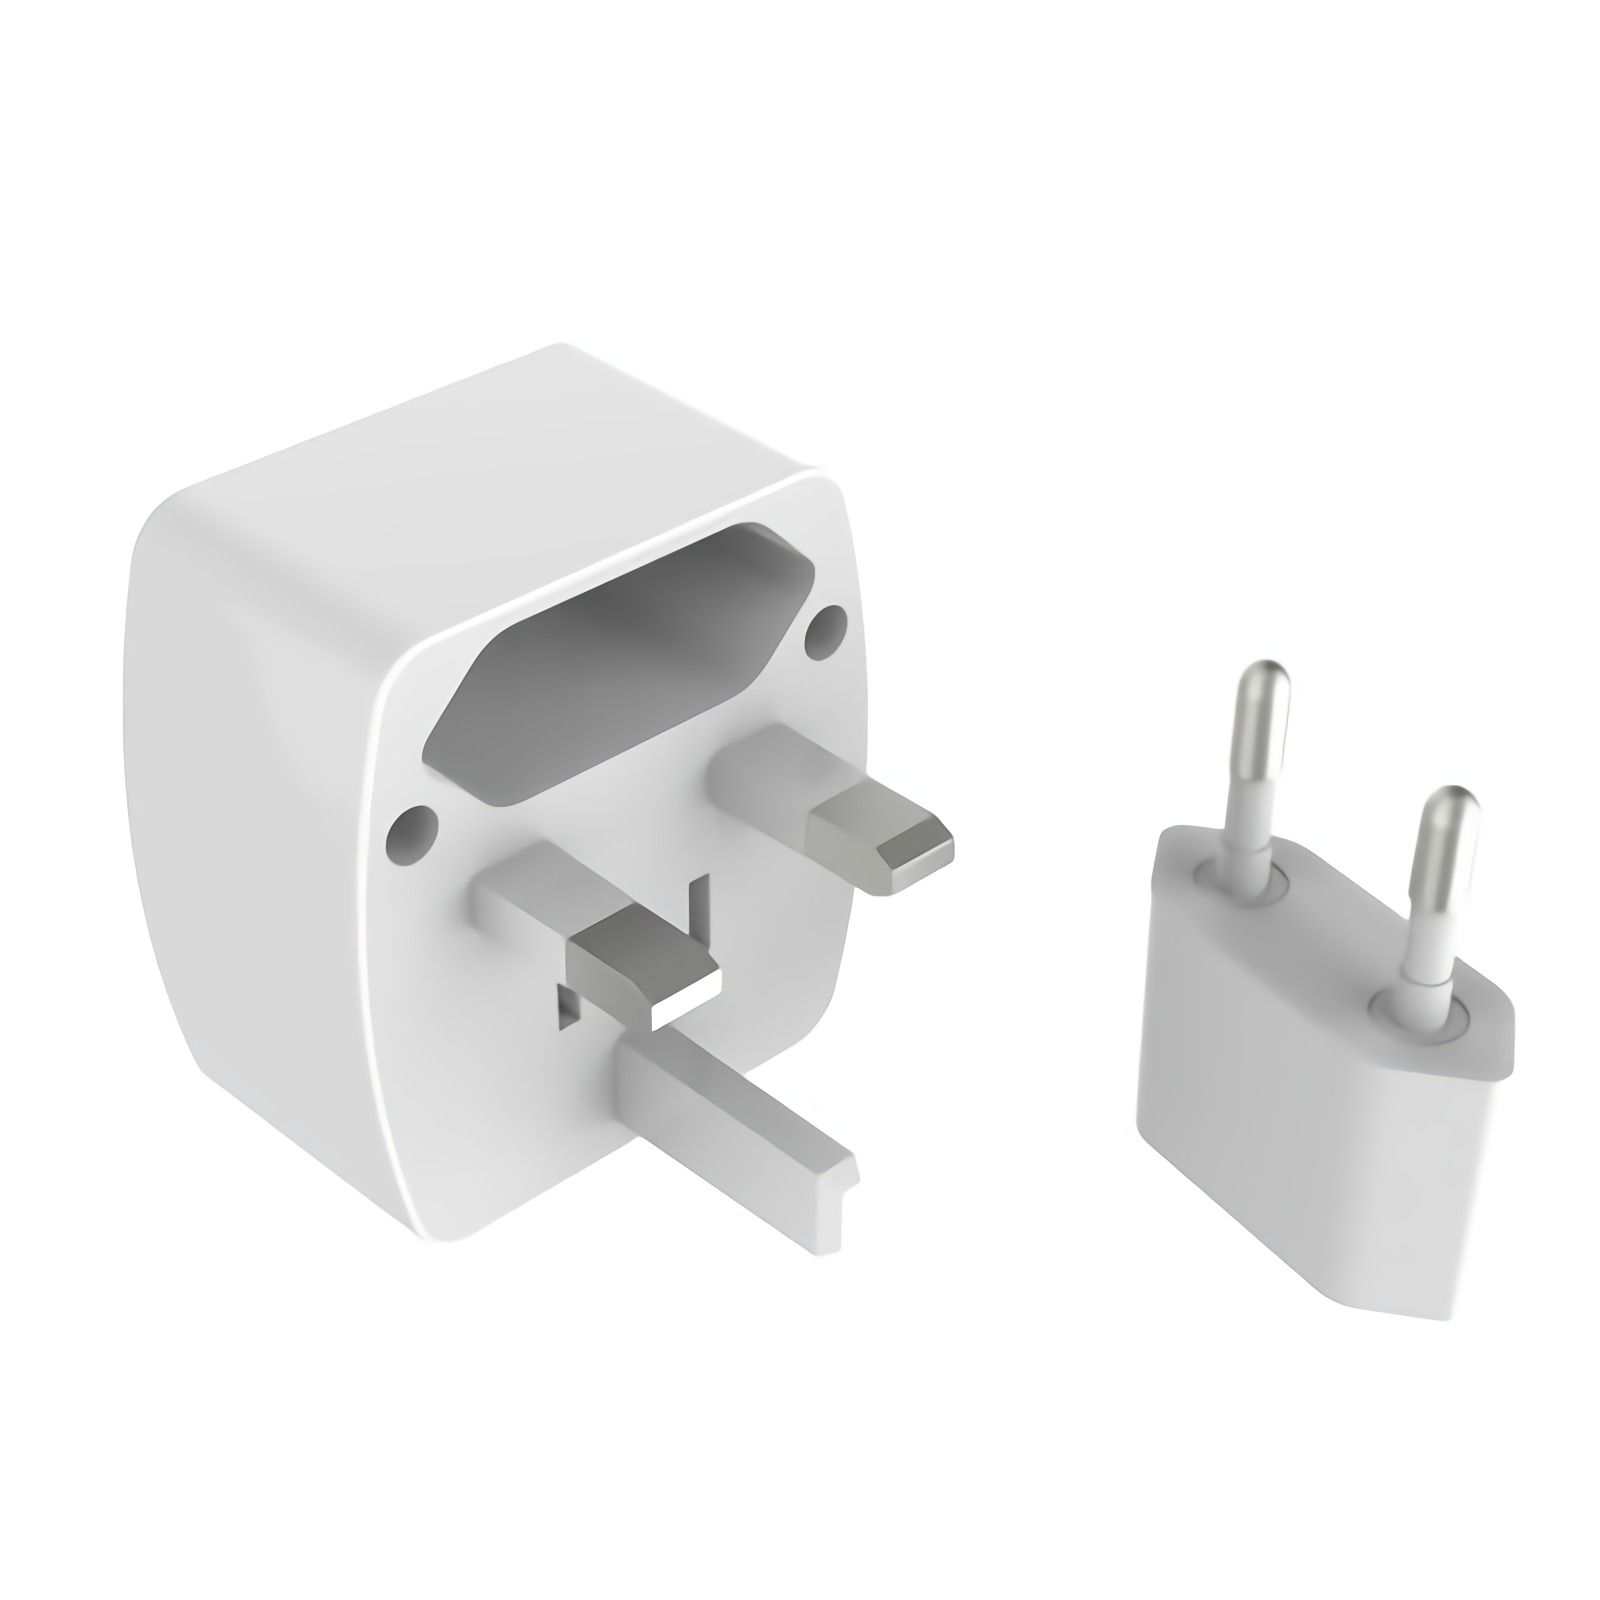 LDNIO-Travel-Adapter-Multifunction-Connector-Projectable-Gobal-Useful-1688741